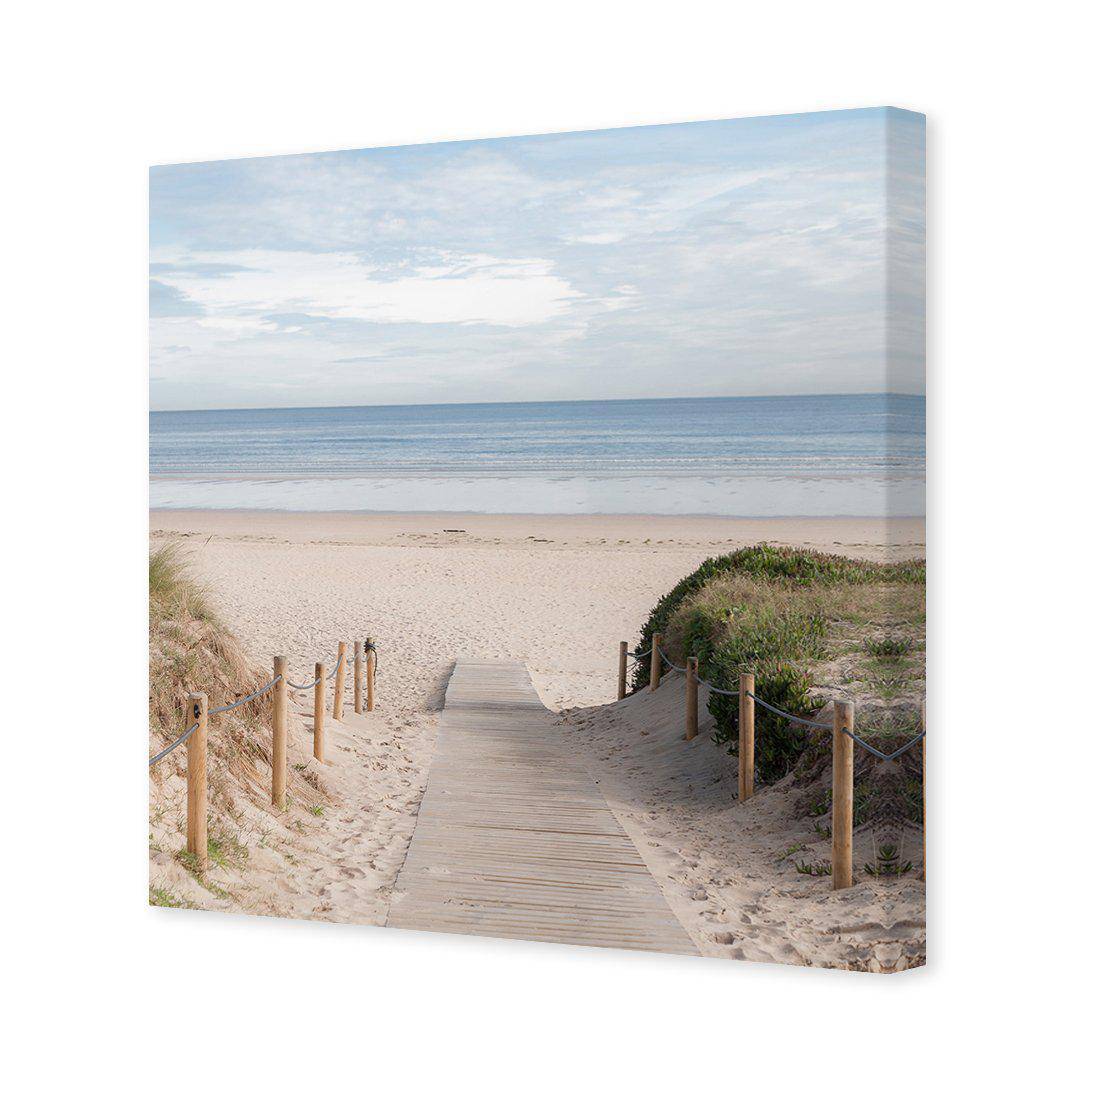 Pathway To The Sea Canvas Art-Canvas-Wall Art Designs-30x30cm-Canvas - No Frame-Wall Art Designs